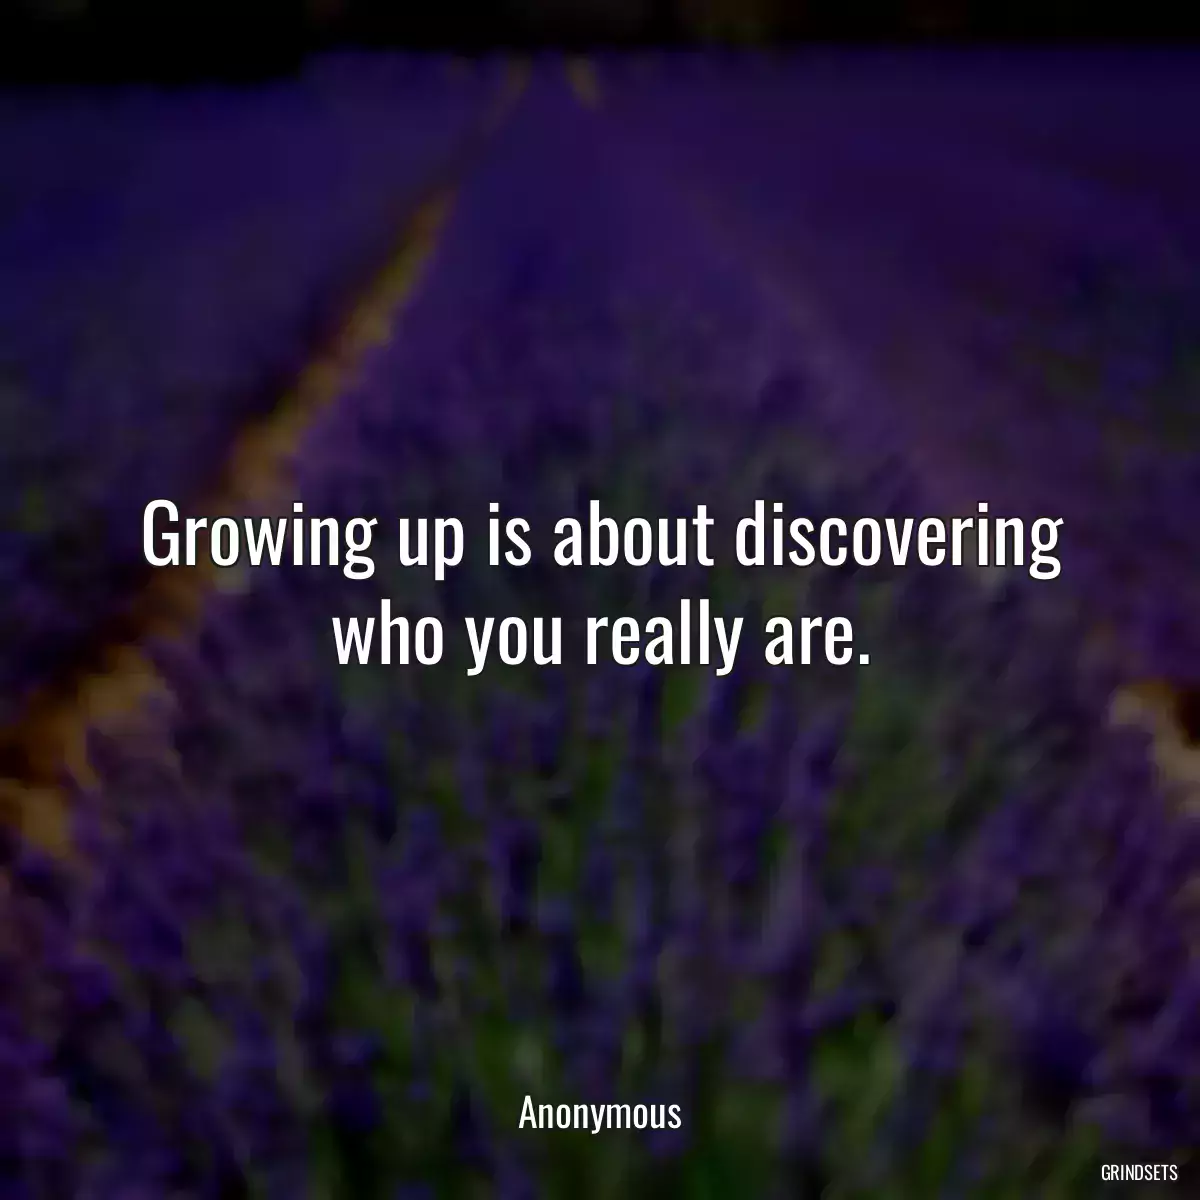 Growing up is about discovering who you really are.